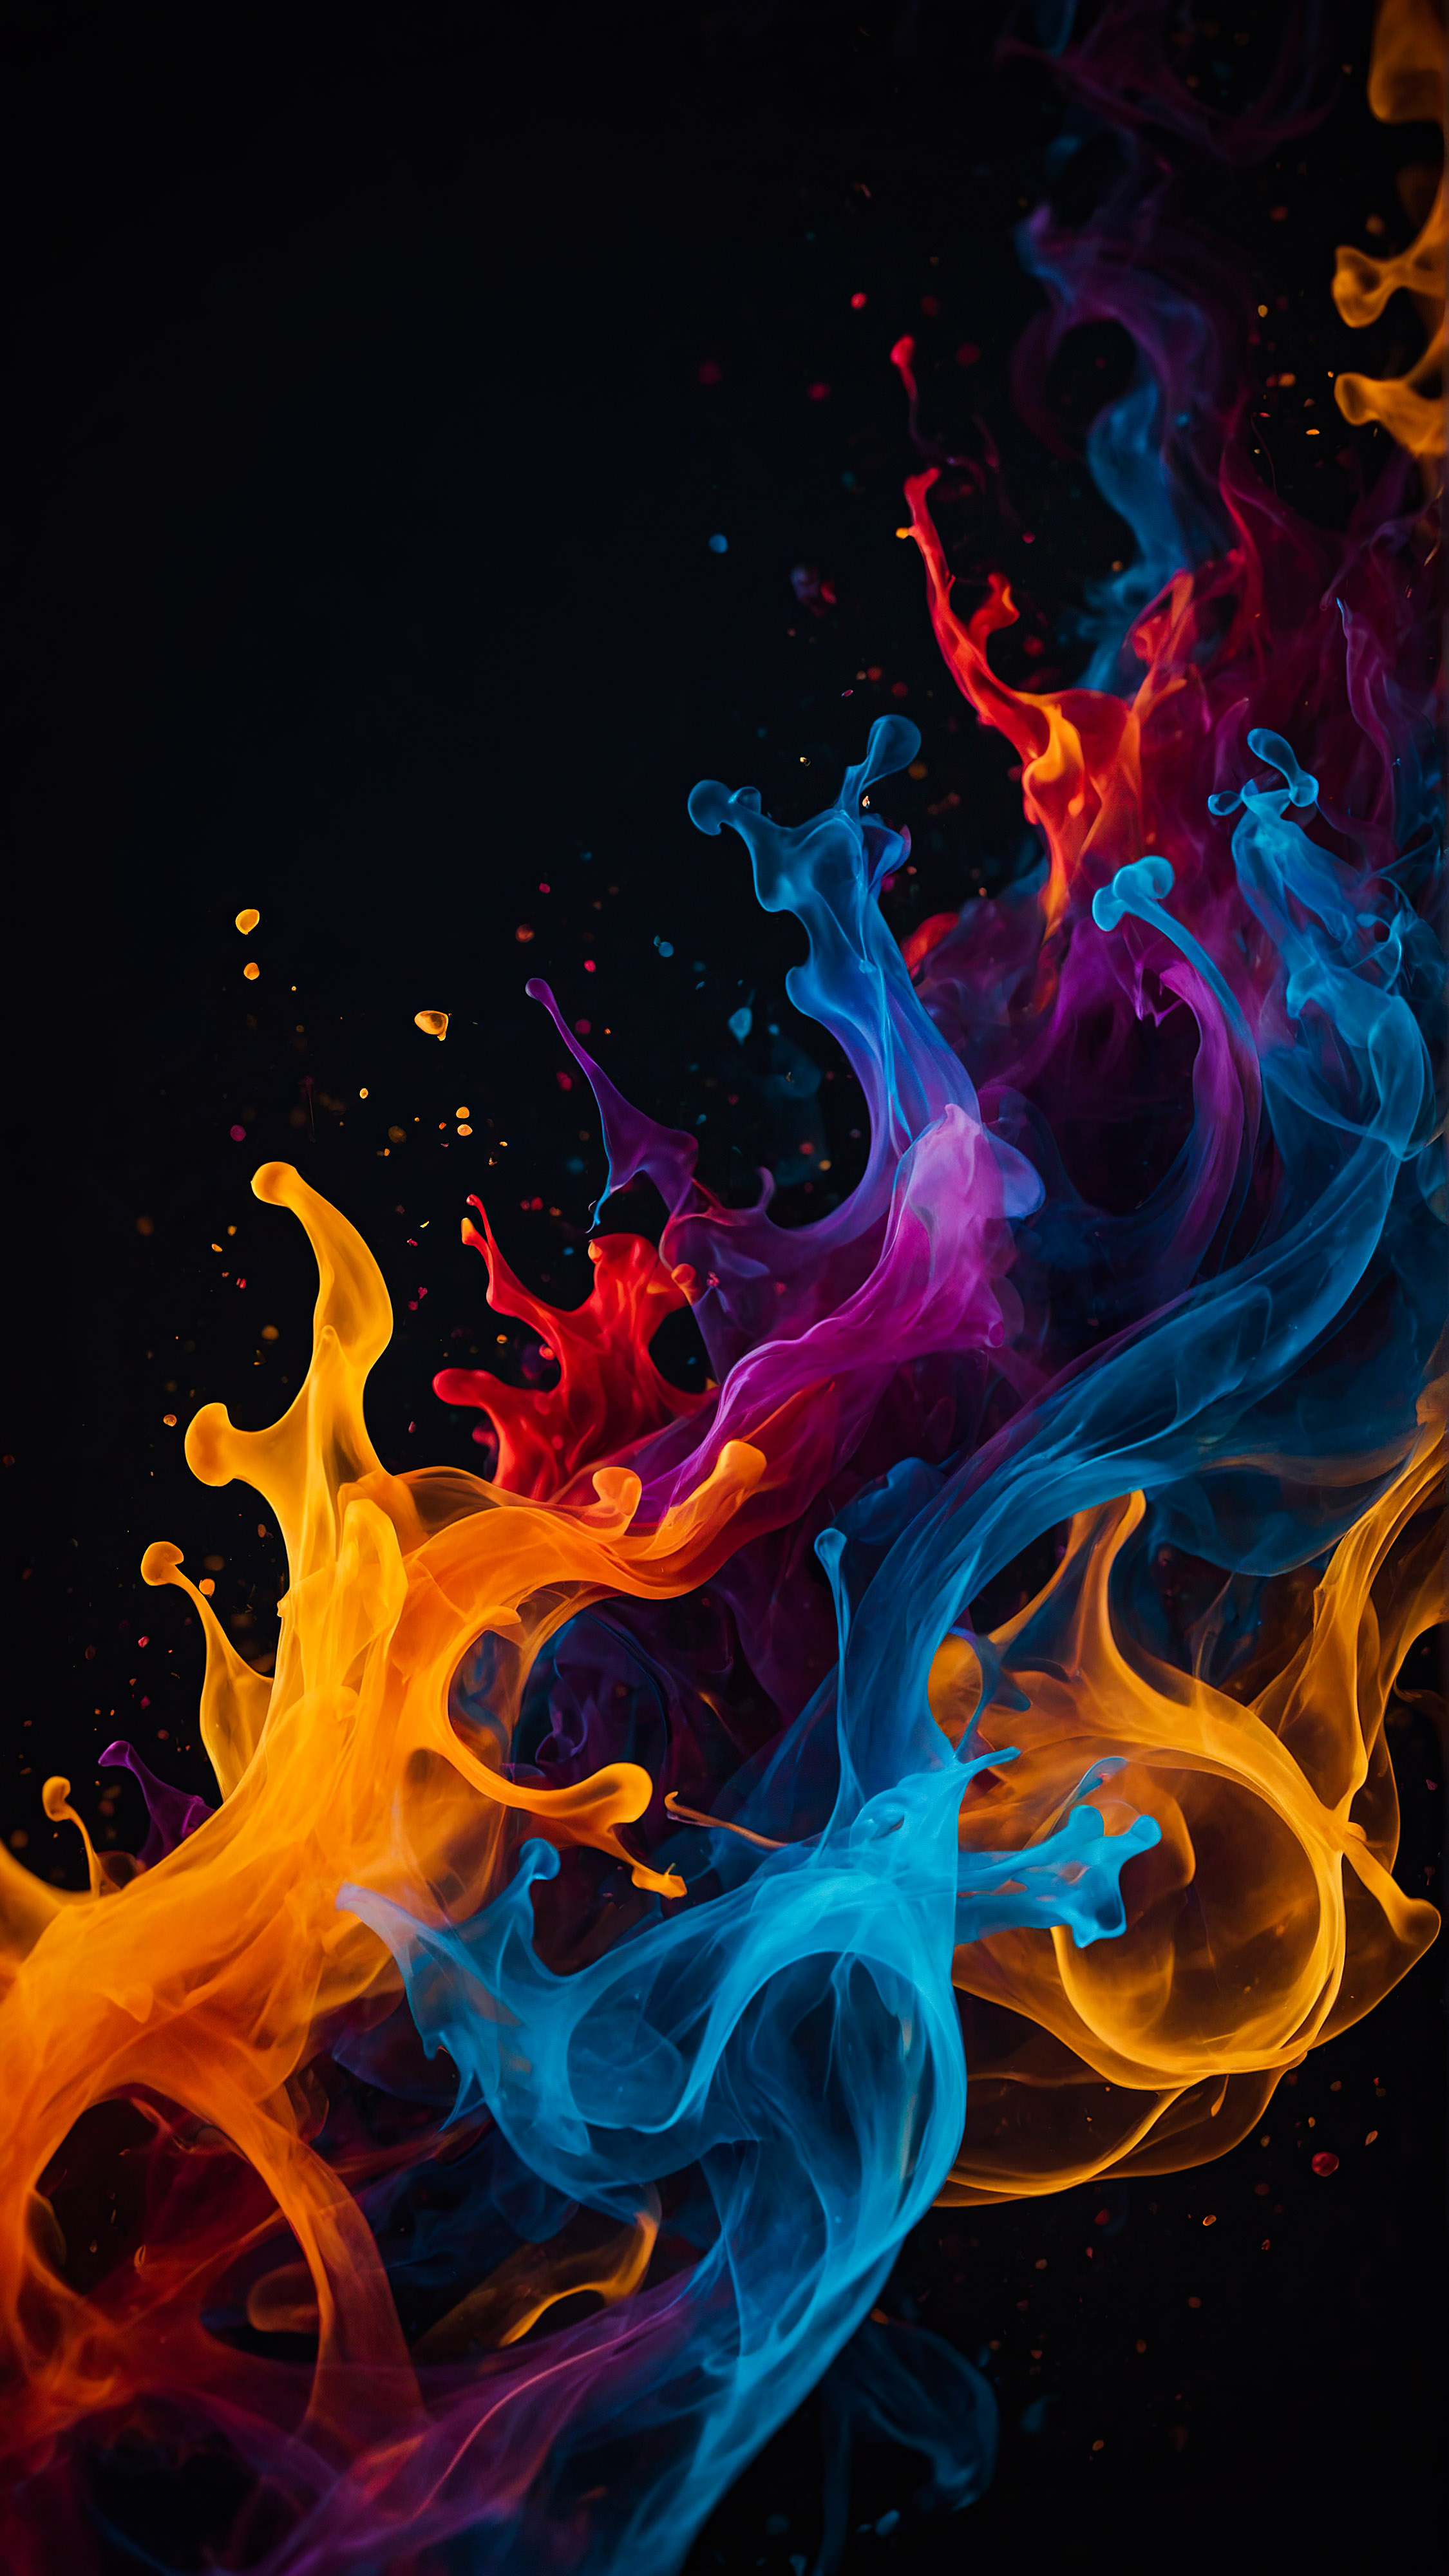 Get a sense of movement and energy with our black iPhone wallpaper in 4K, featuring intertwined abstract shapes that resemble colorful flames against a dark background.